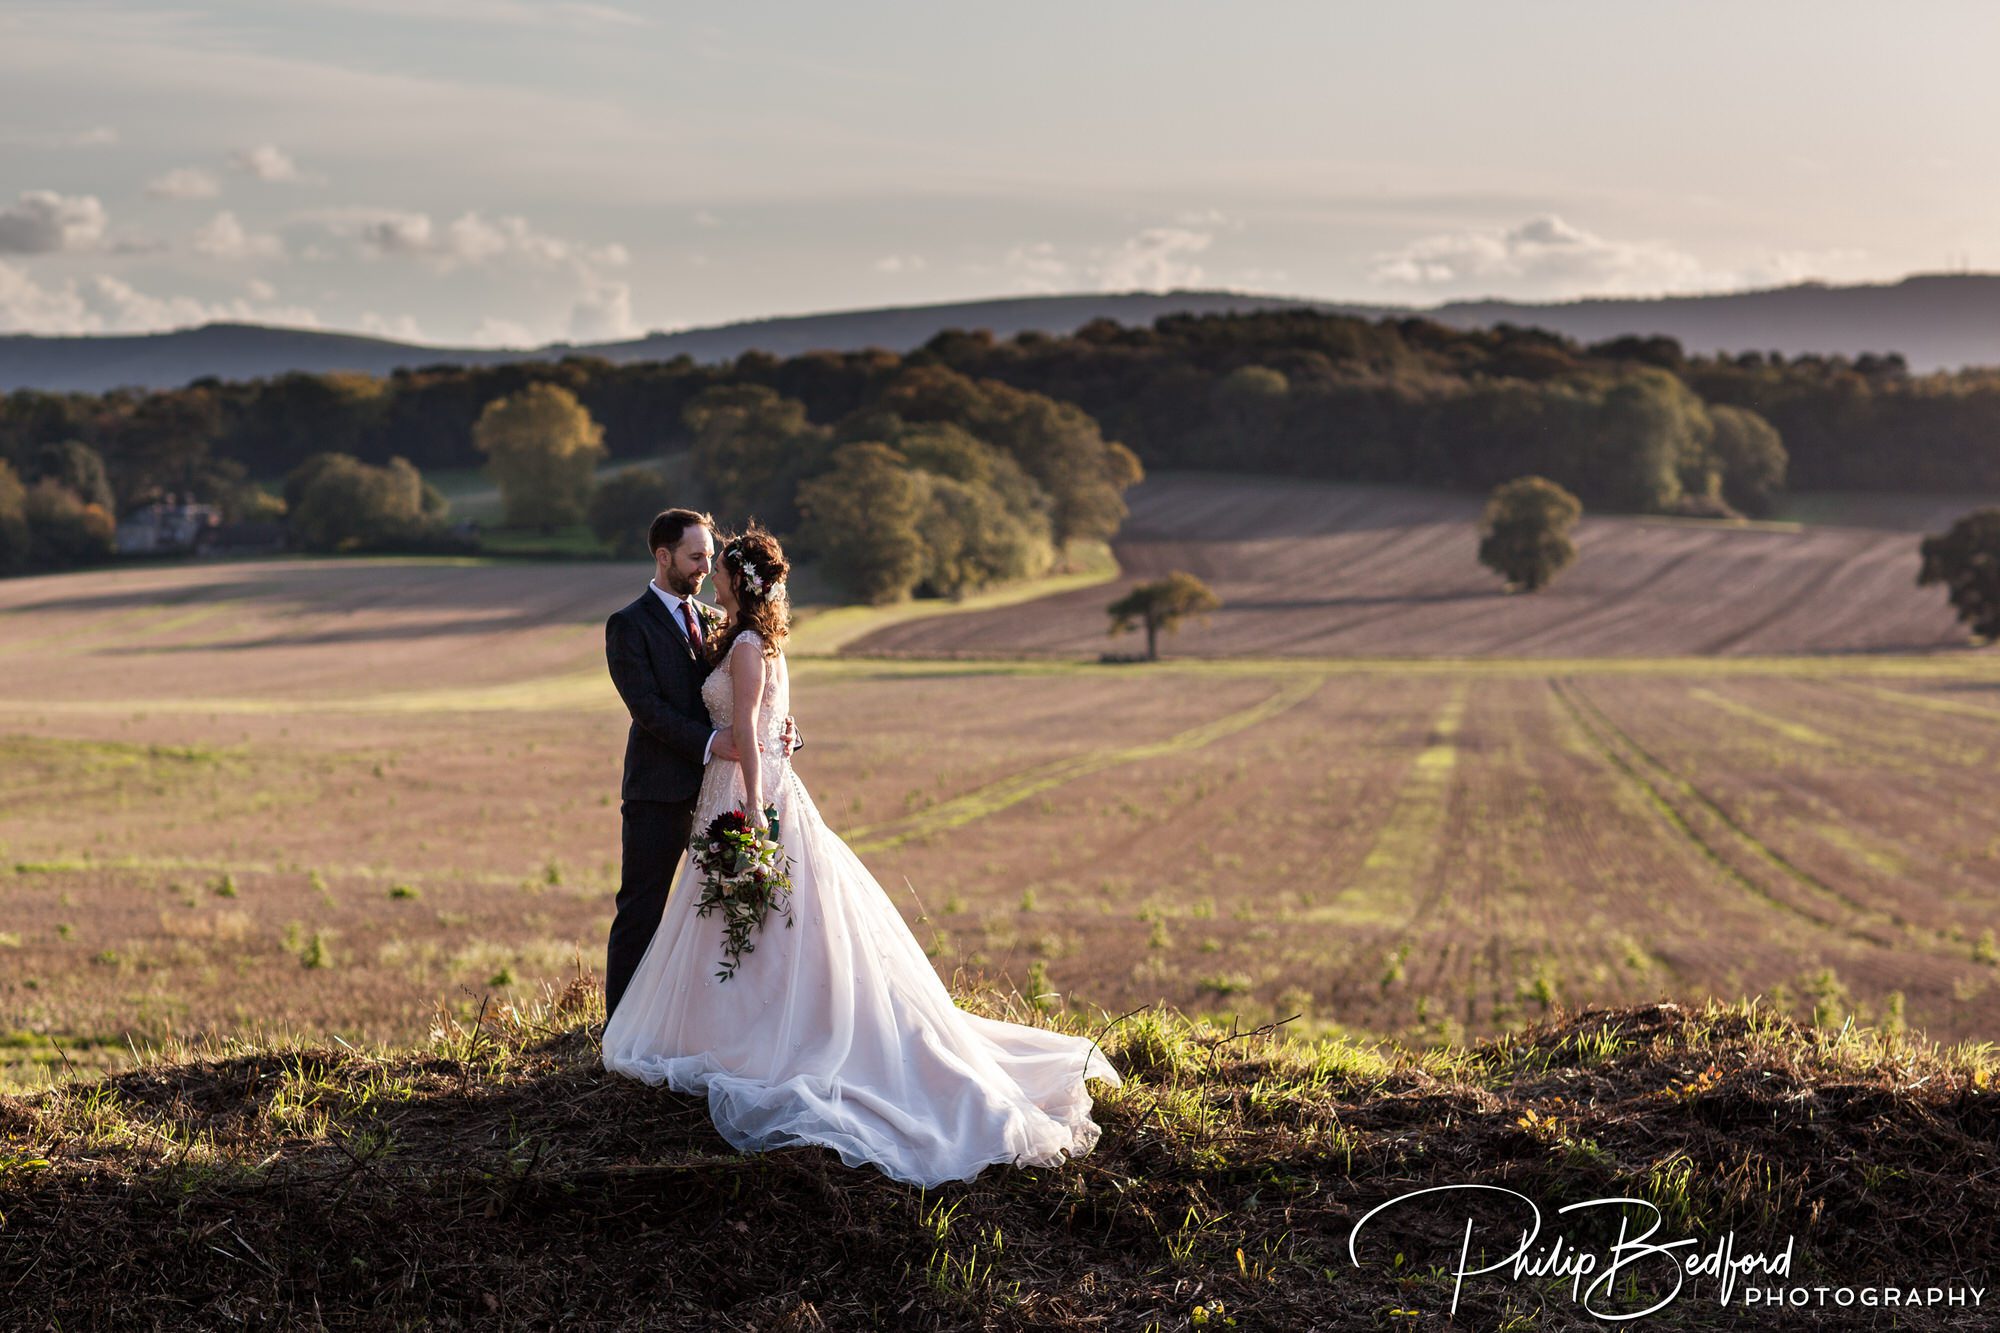 Fitzleroi Barn wedding photographer - bride and groom in golden hour, lighting with the South Downs countryside in the background 